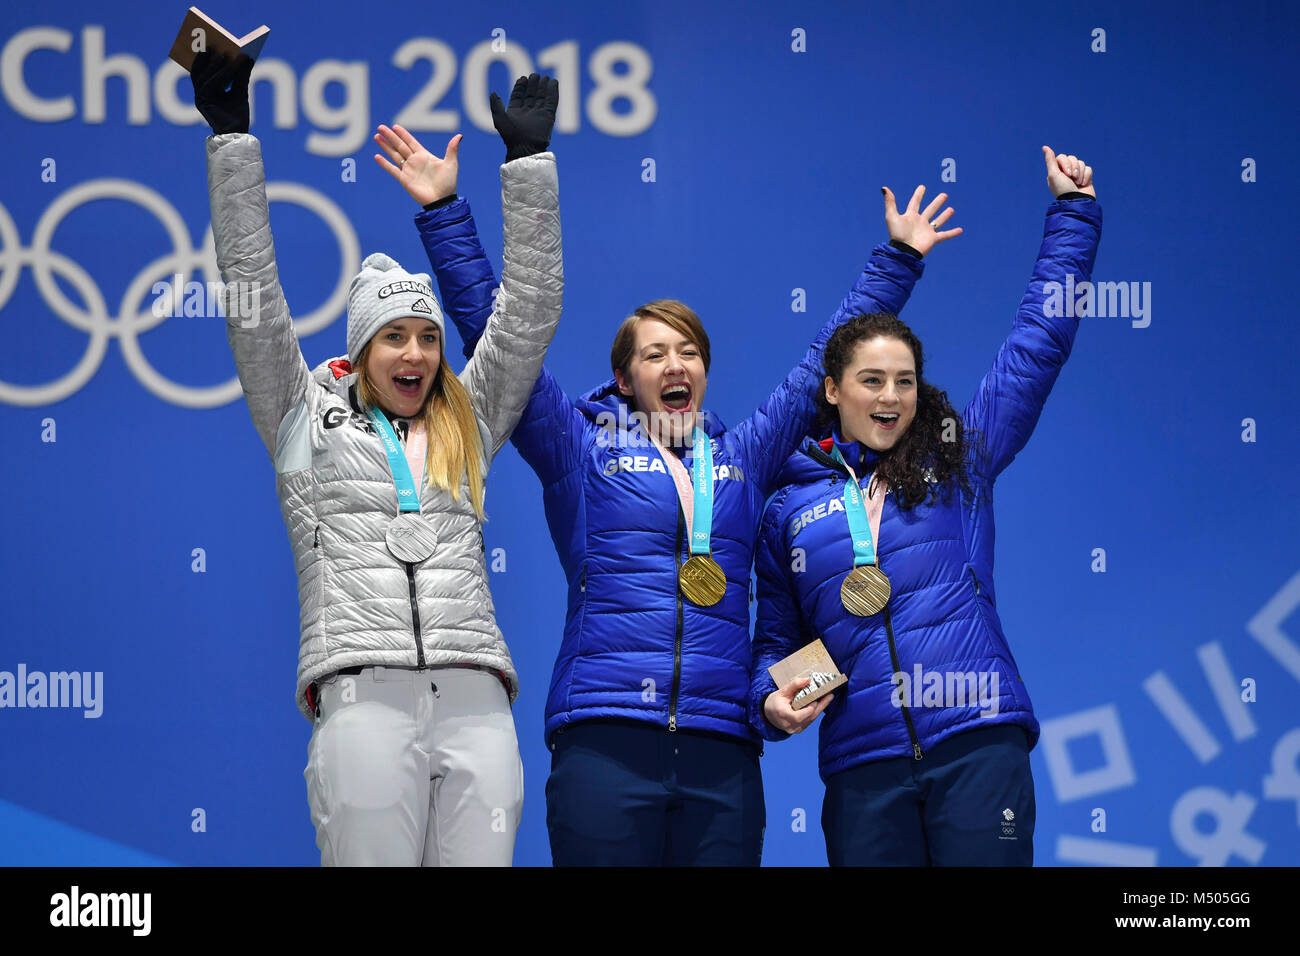 von links: Jacqueline LOELLING (GER), Lolling, 2. Platz, Silber, Silbermedaille, Silbermedaillengewinnerin, Lizzy YARNHOLD; GBR, 1. Platz, Goldmedaillengewinnerin, Gold, Goldmedaille, Olympiasiegerin, Laura DEAS, GBR, 3. Platz, Bronze, Bronzemedaille, Bronzemedaillengewinnerin, Skeleton Women, Frauen. Siegerehrung, Victory Ceremony, PyeongChang Olympic Medals Plaza am 18.02.2018. Olympische Winterspiele 2018, vom 09.02. - 25.02.2018 in PyeongChang/ Suedkorea. |usage worldwide/Alamy Live News Stock Photo